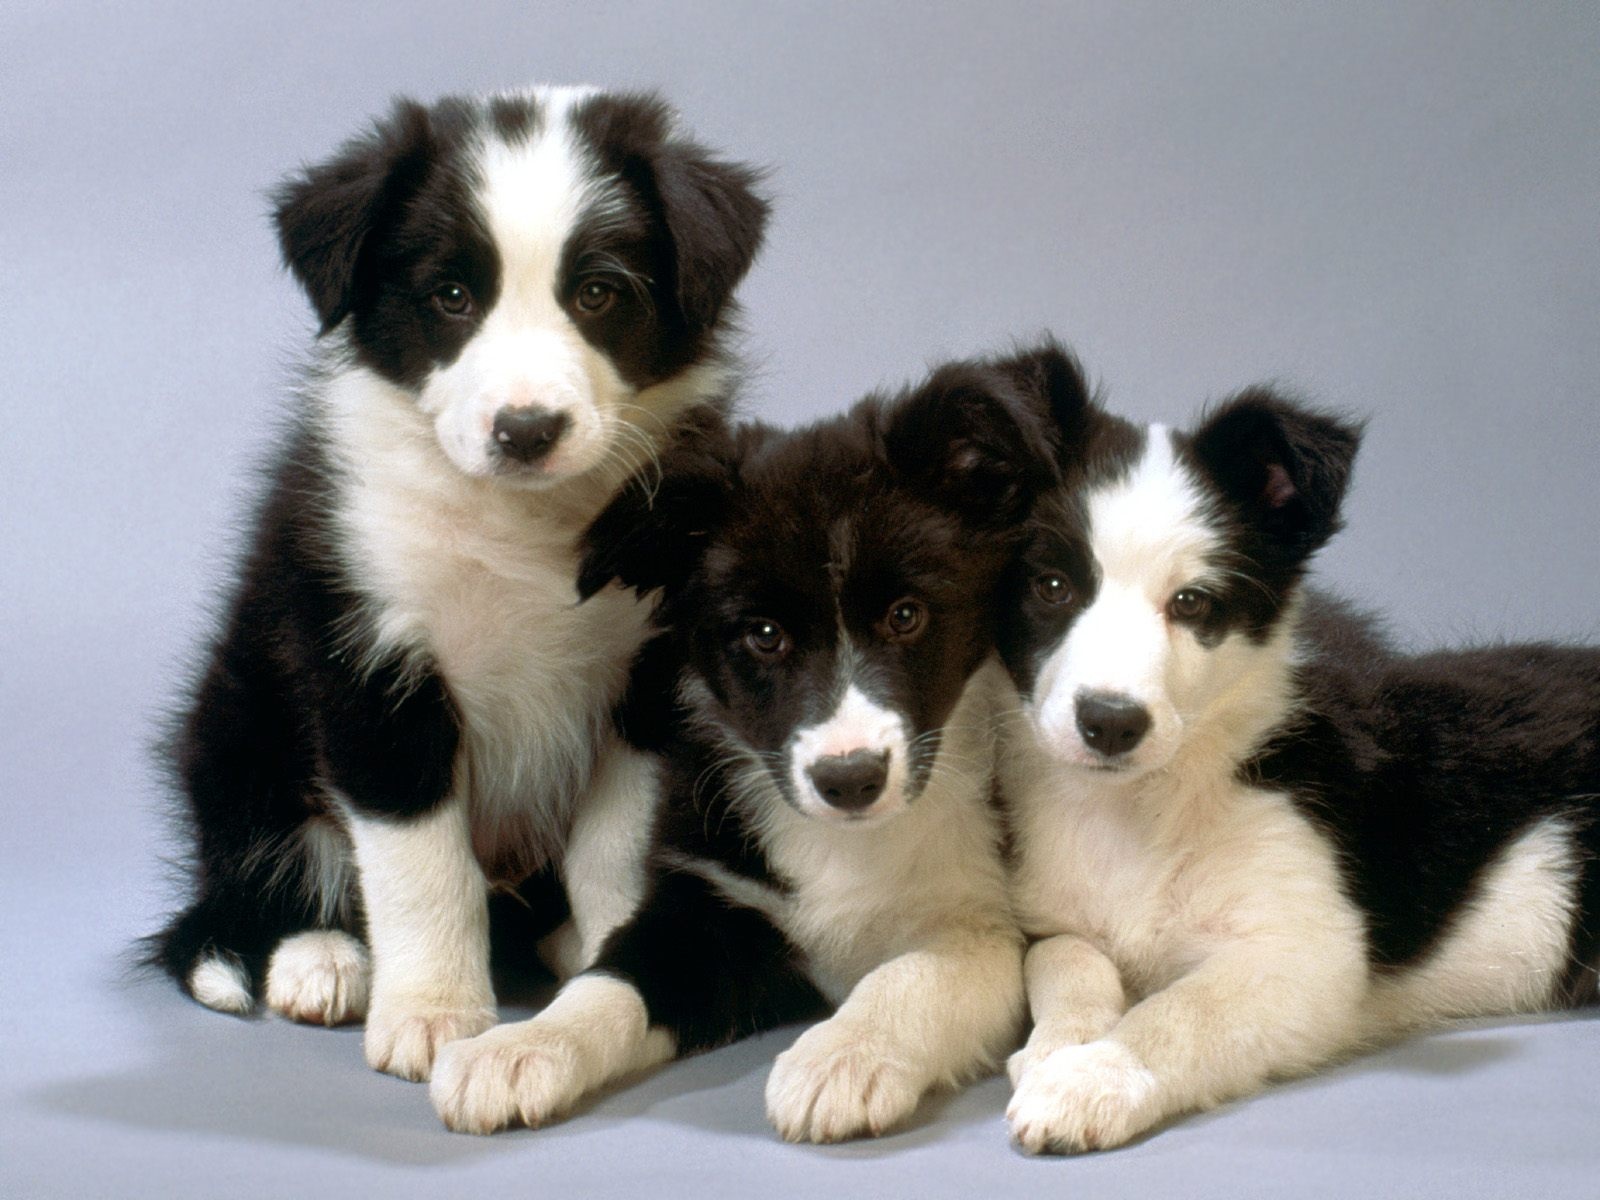 Border Collie Puppies Wallpaper Image Amp Pictures Becuo